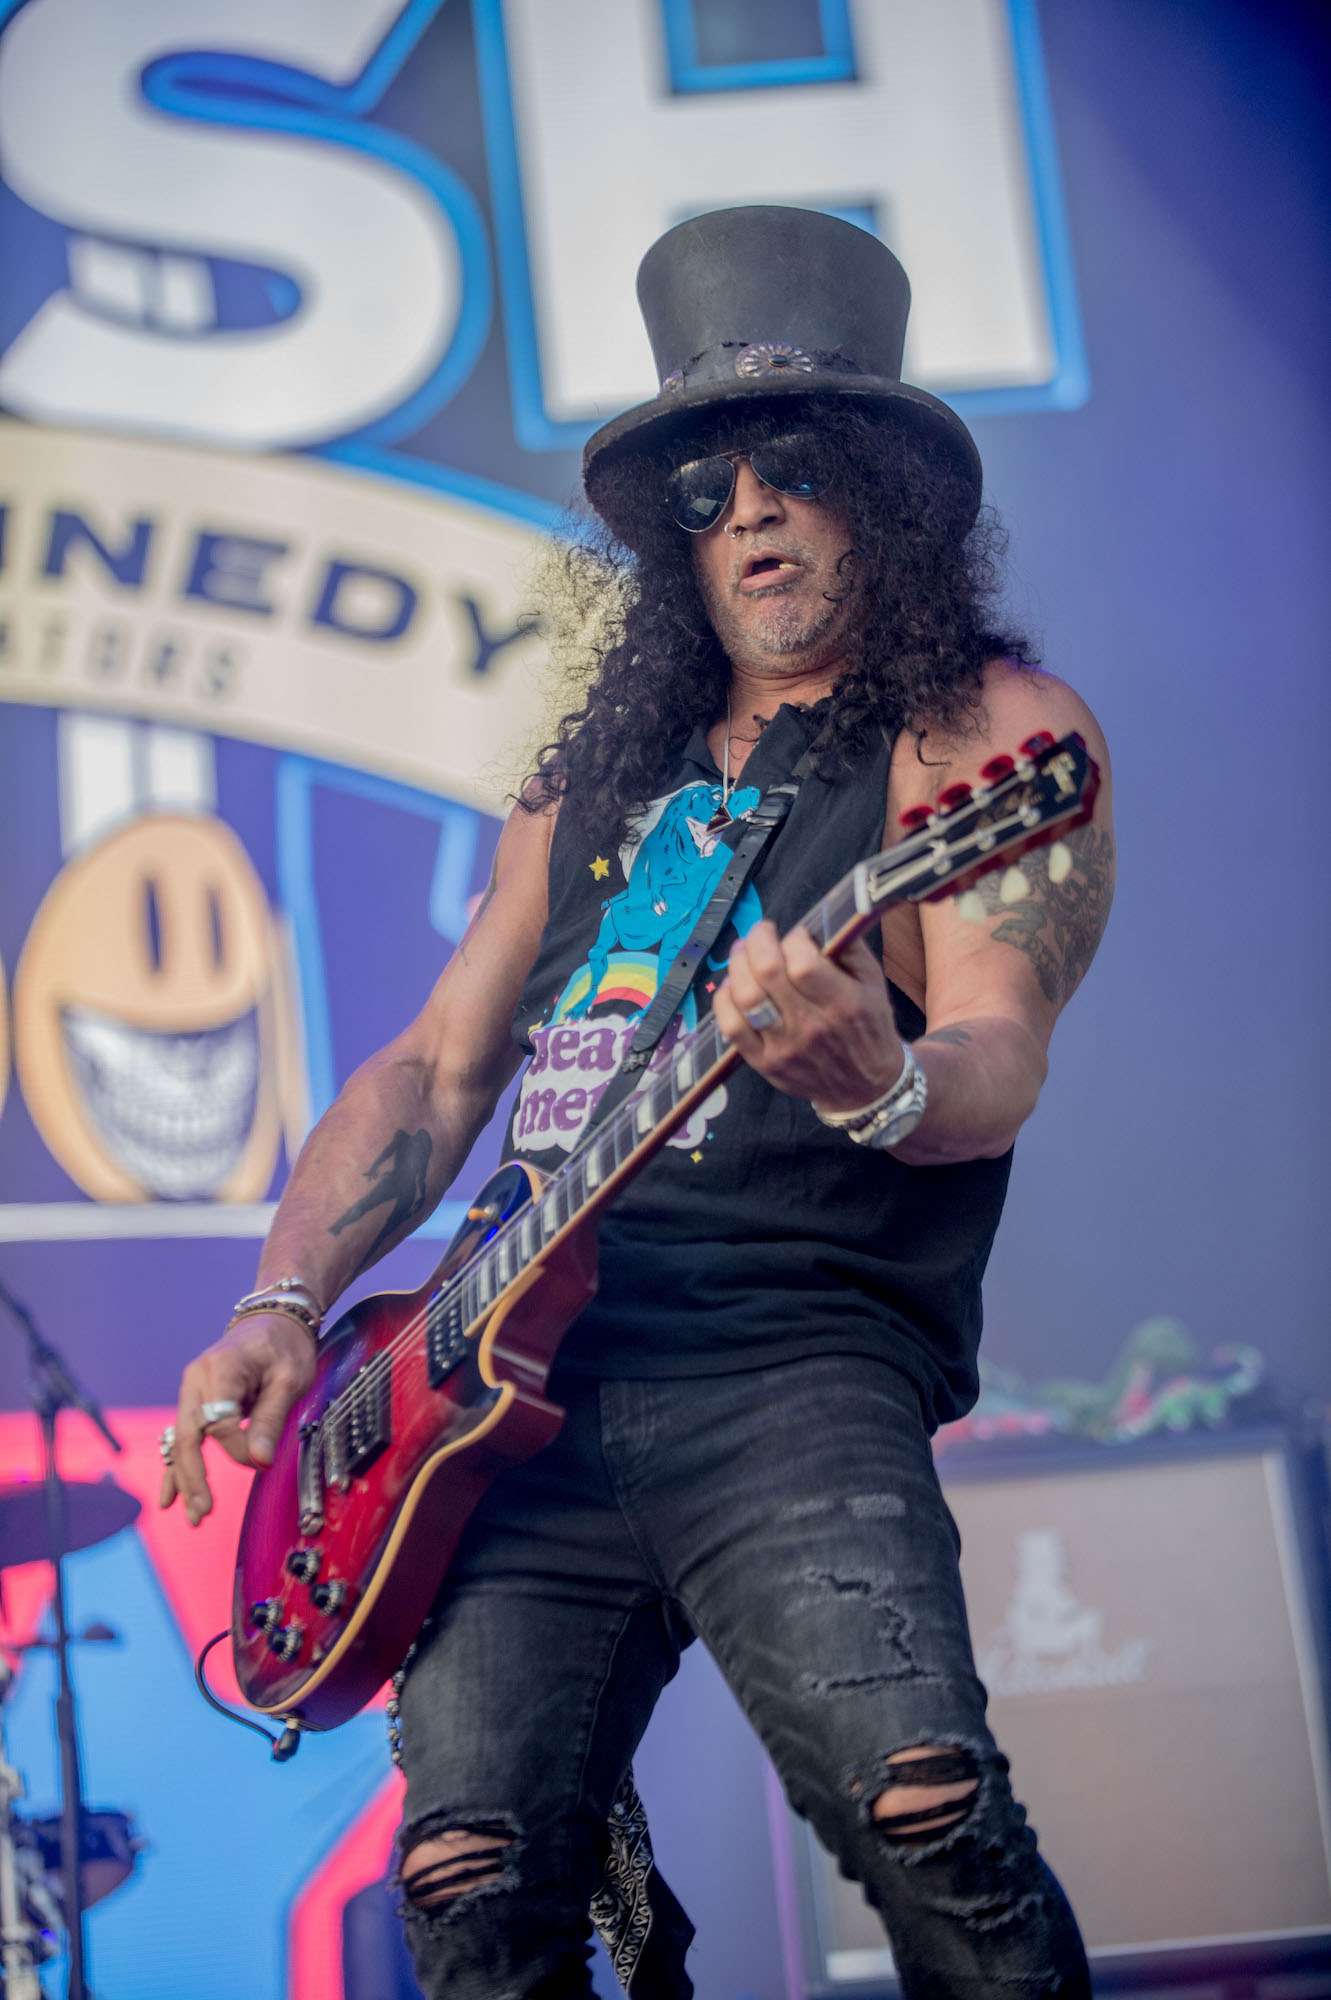 SLASH Featuring Myles Kennedy And The Conspirators Live at Lollapalooza [GALLERY] 10